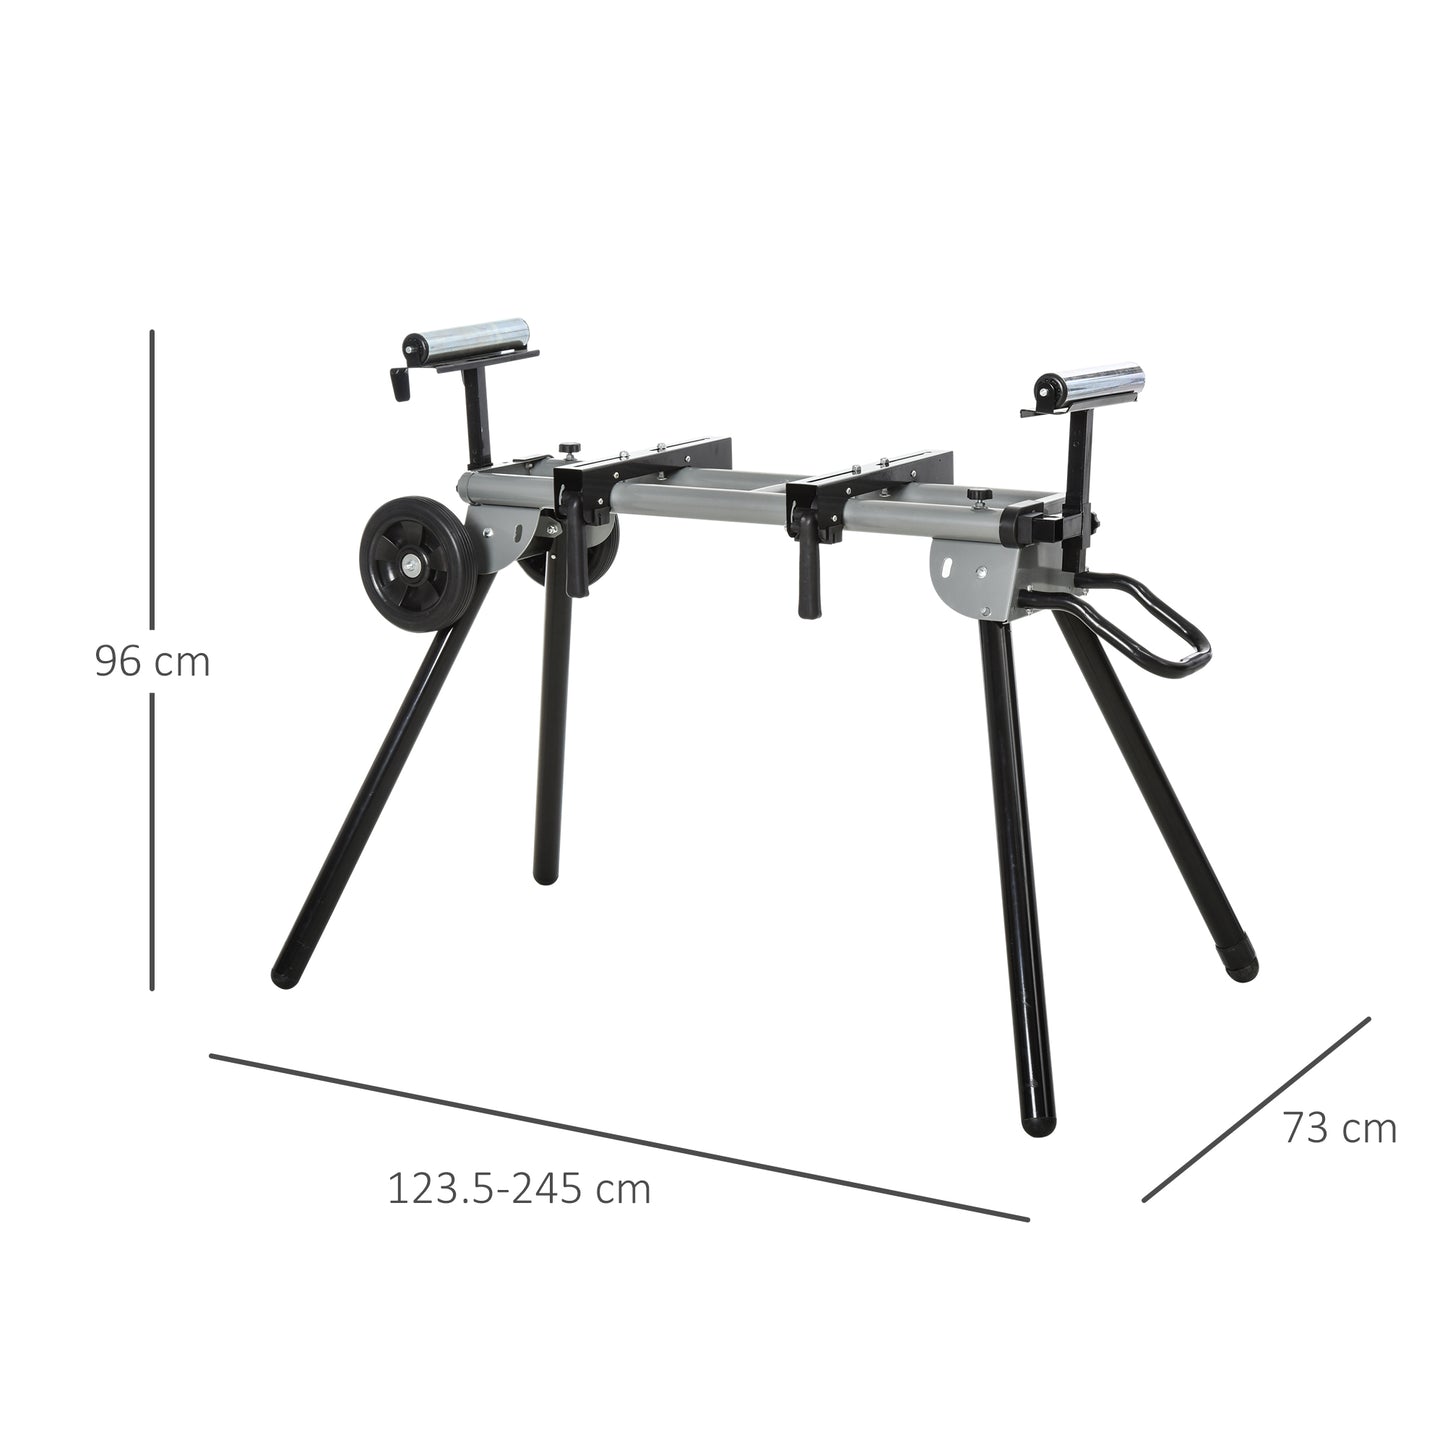 DURHAND Miter Saw Stand with Extensions, Sawhorse for Cutting Logs, Foldable with Wheels Max Load 150 Kg, Black and Grey